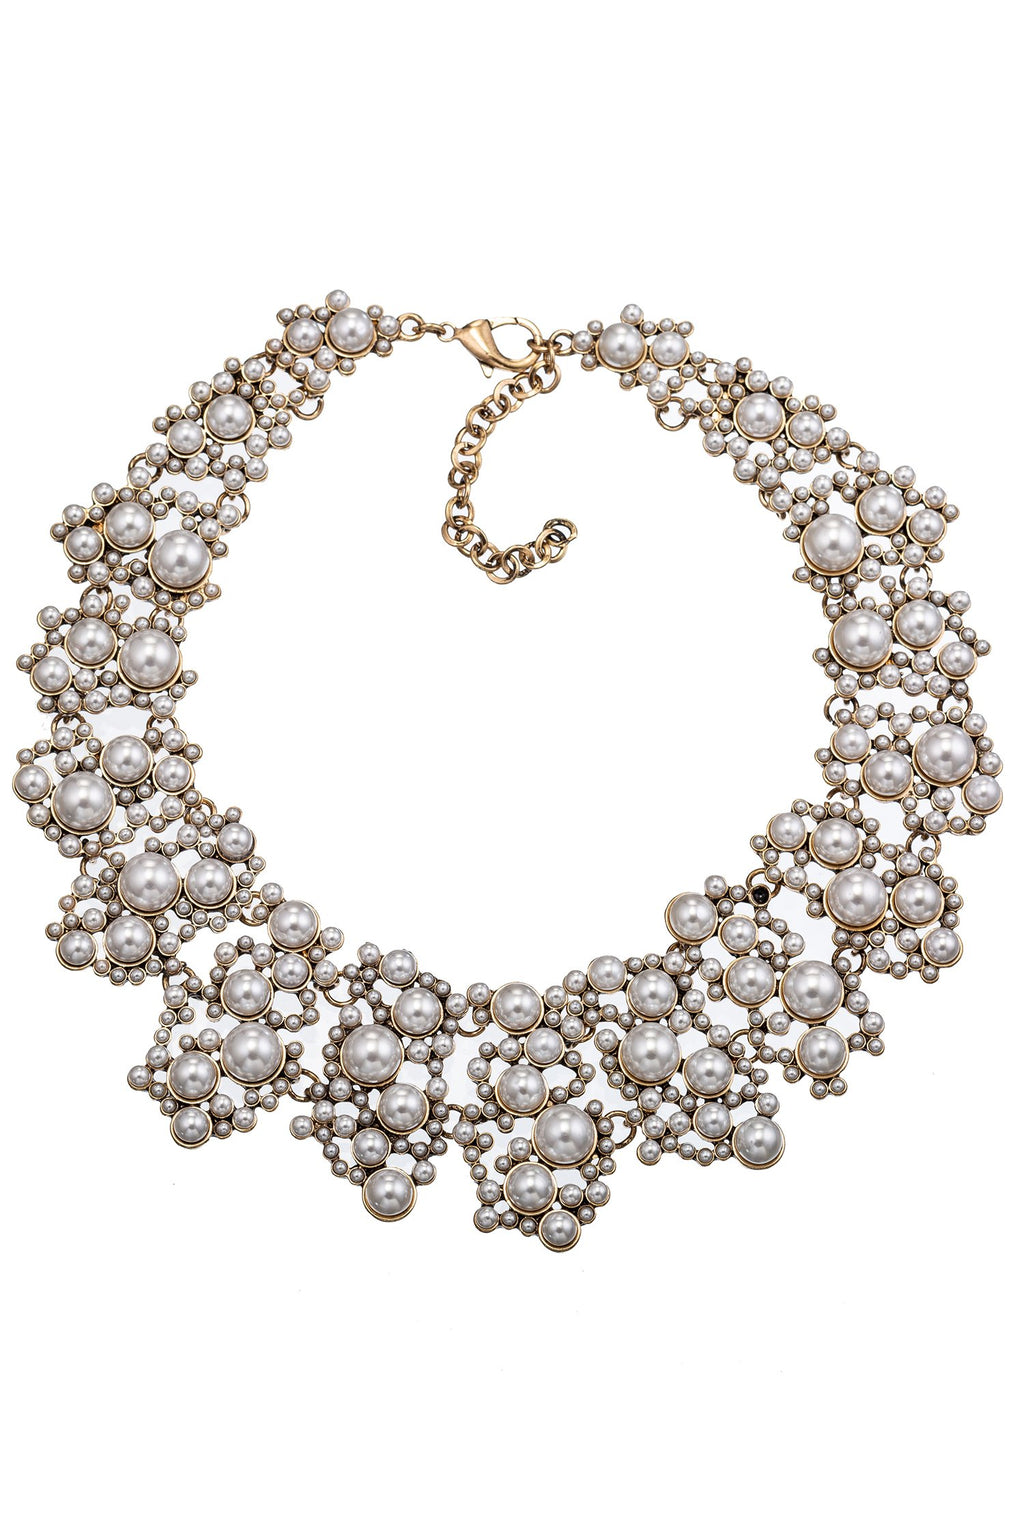 Large collar necklace with beaded pearl design. Features gold tone metal with collar arrangement of glass pearls. Also features lobster clasp closure.